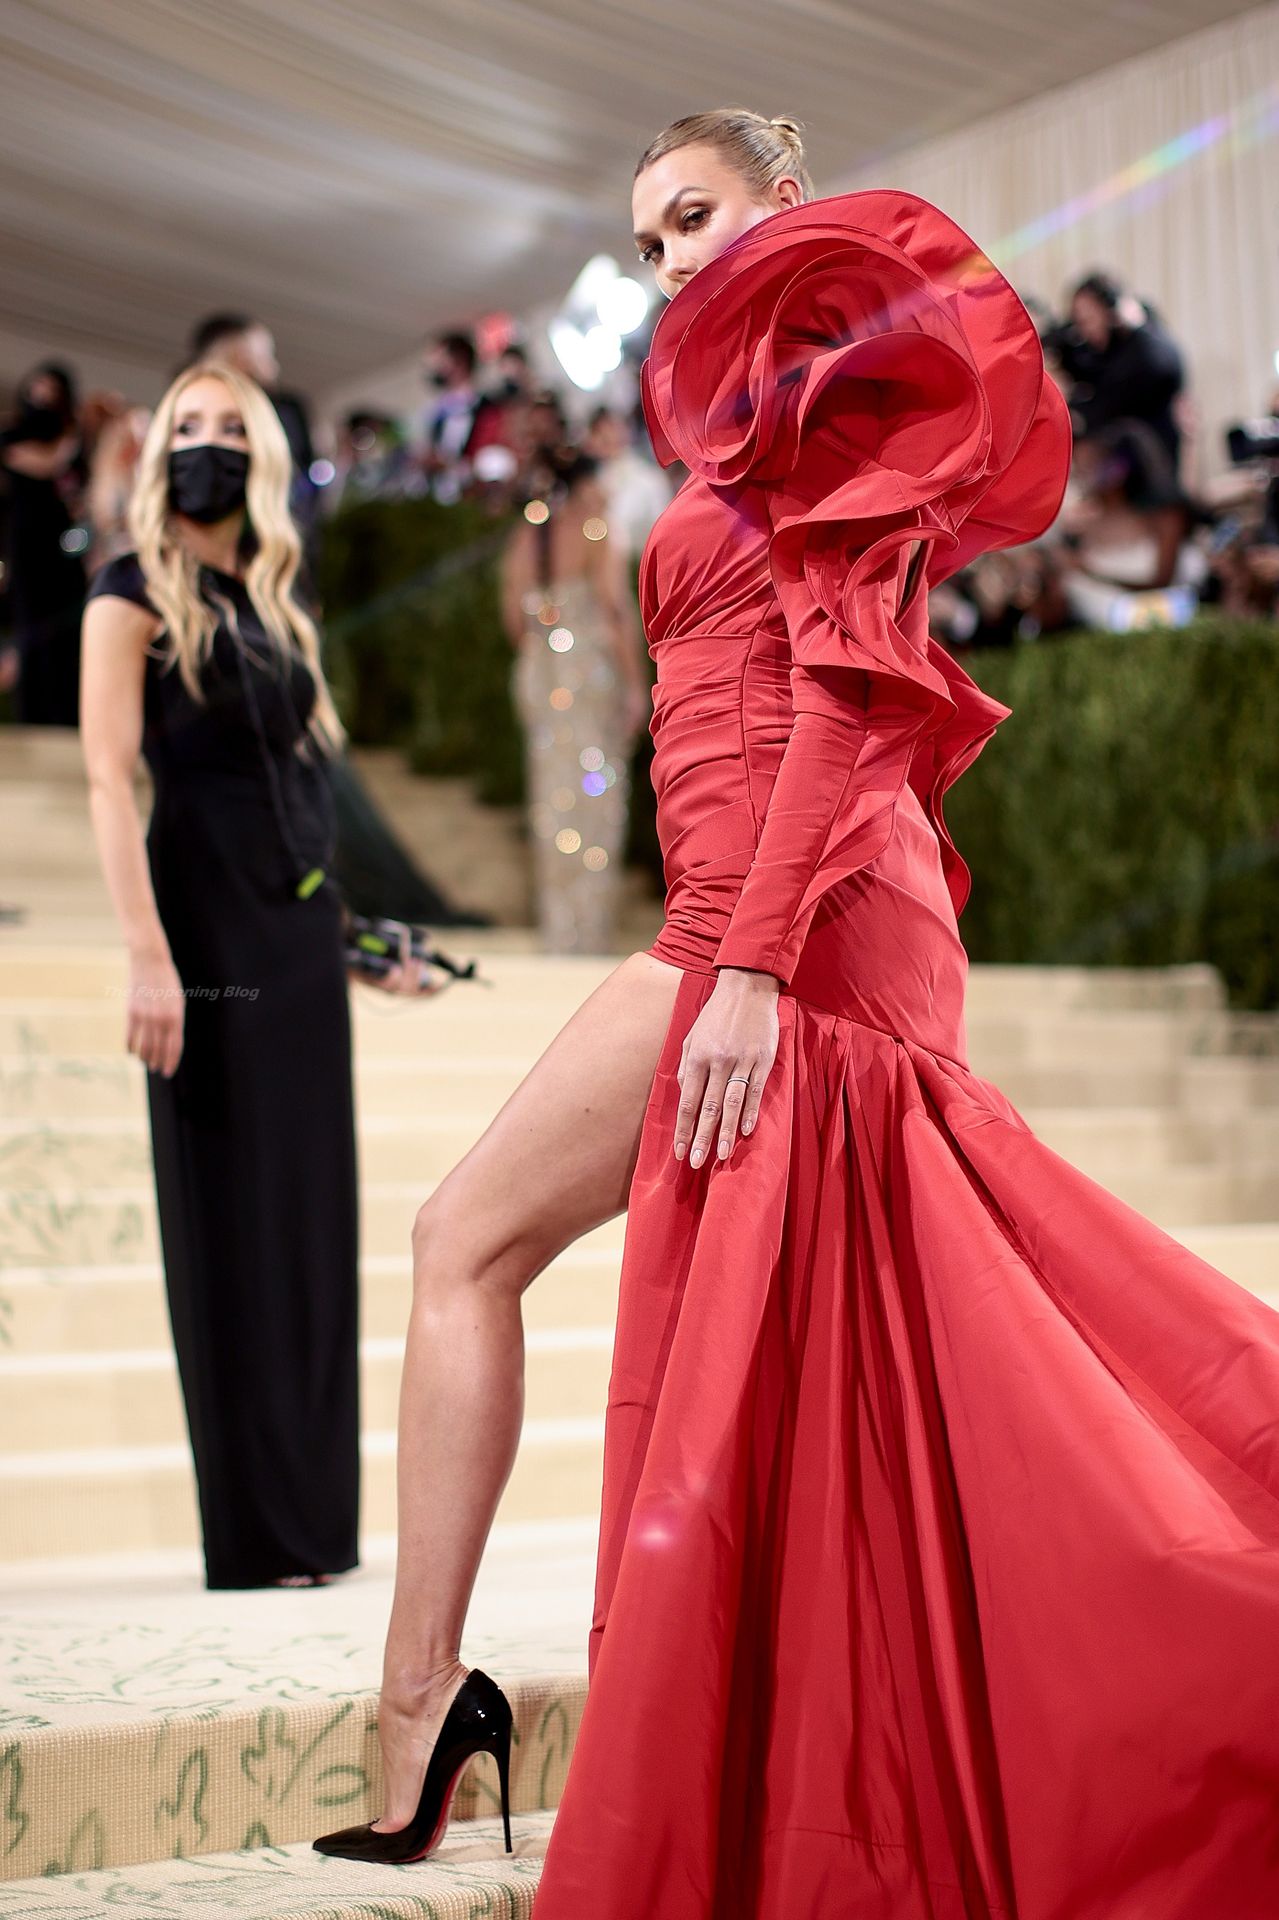 Karlie Kloss Displays Her Cleavage in a Red Dress at the 2021 Met Gala in NYC (23 Photos)